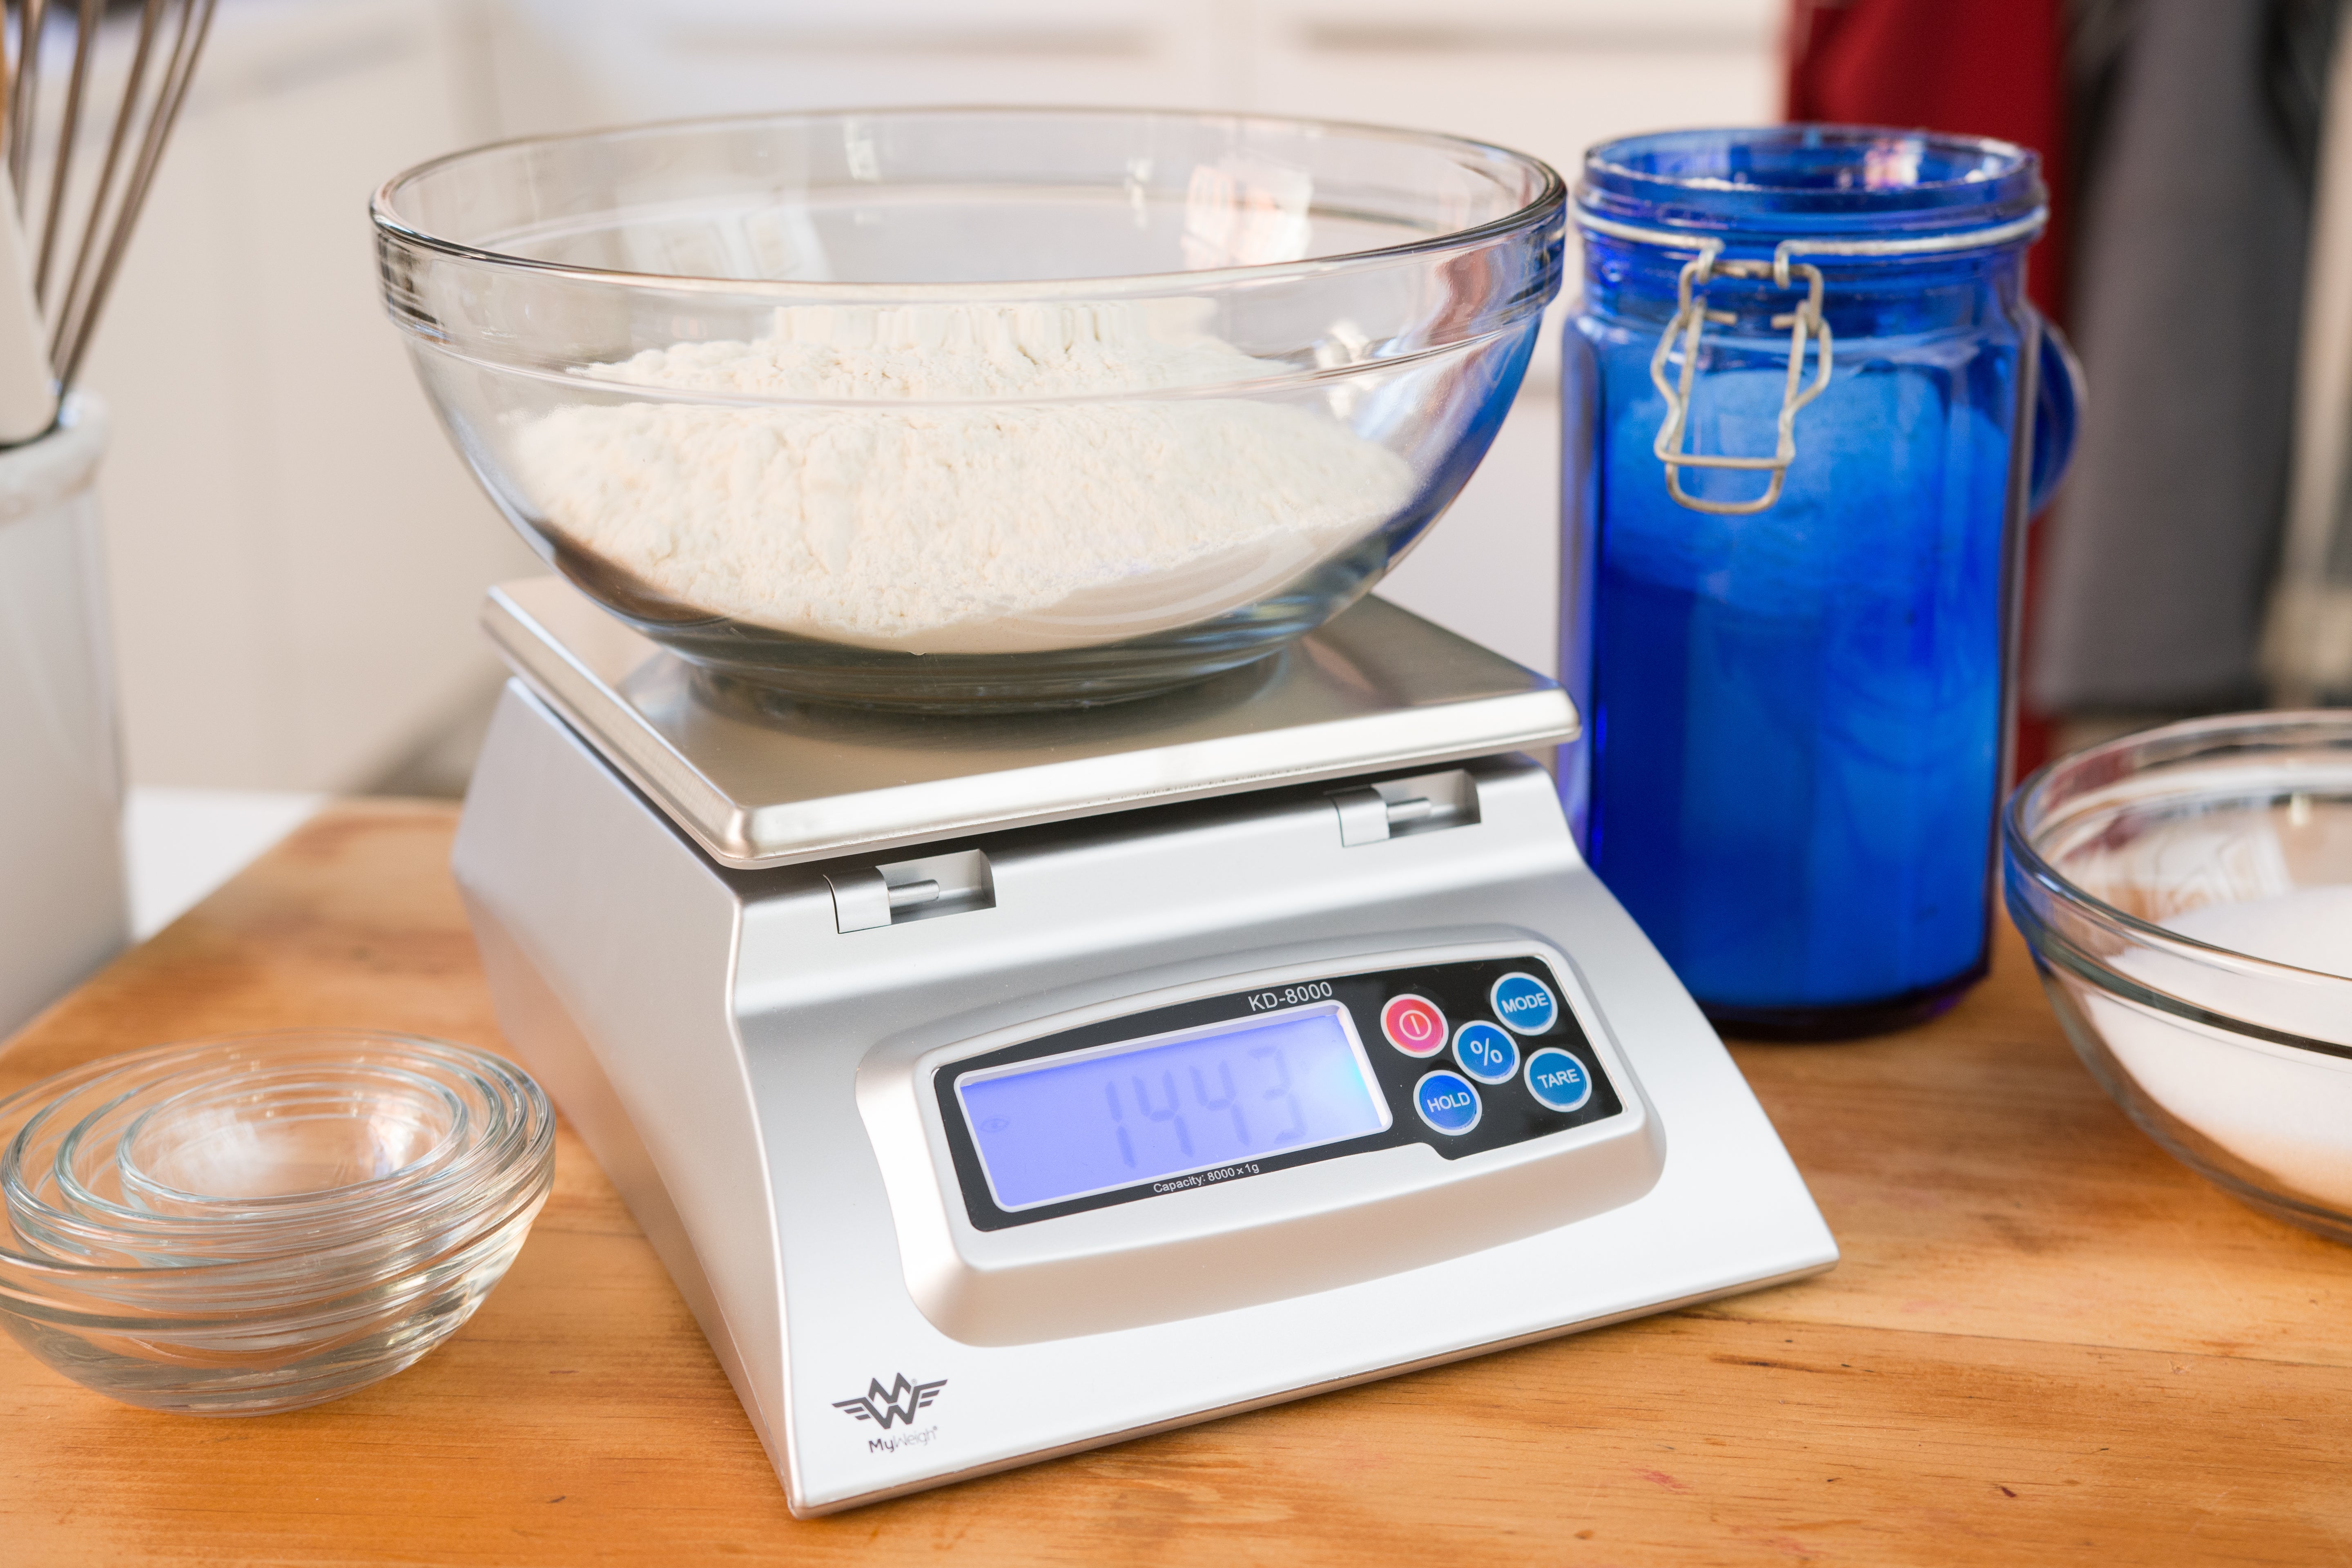 Bowl of flour on the kitchen scale.